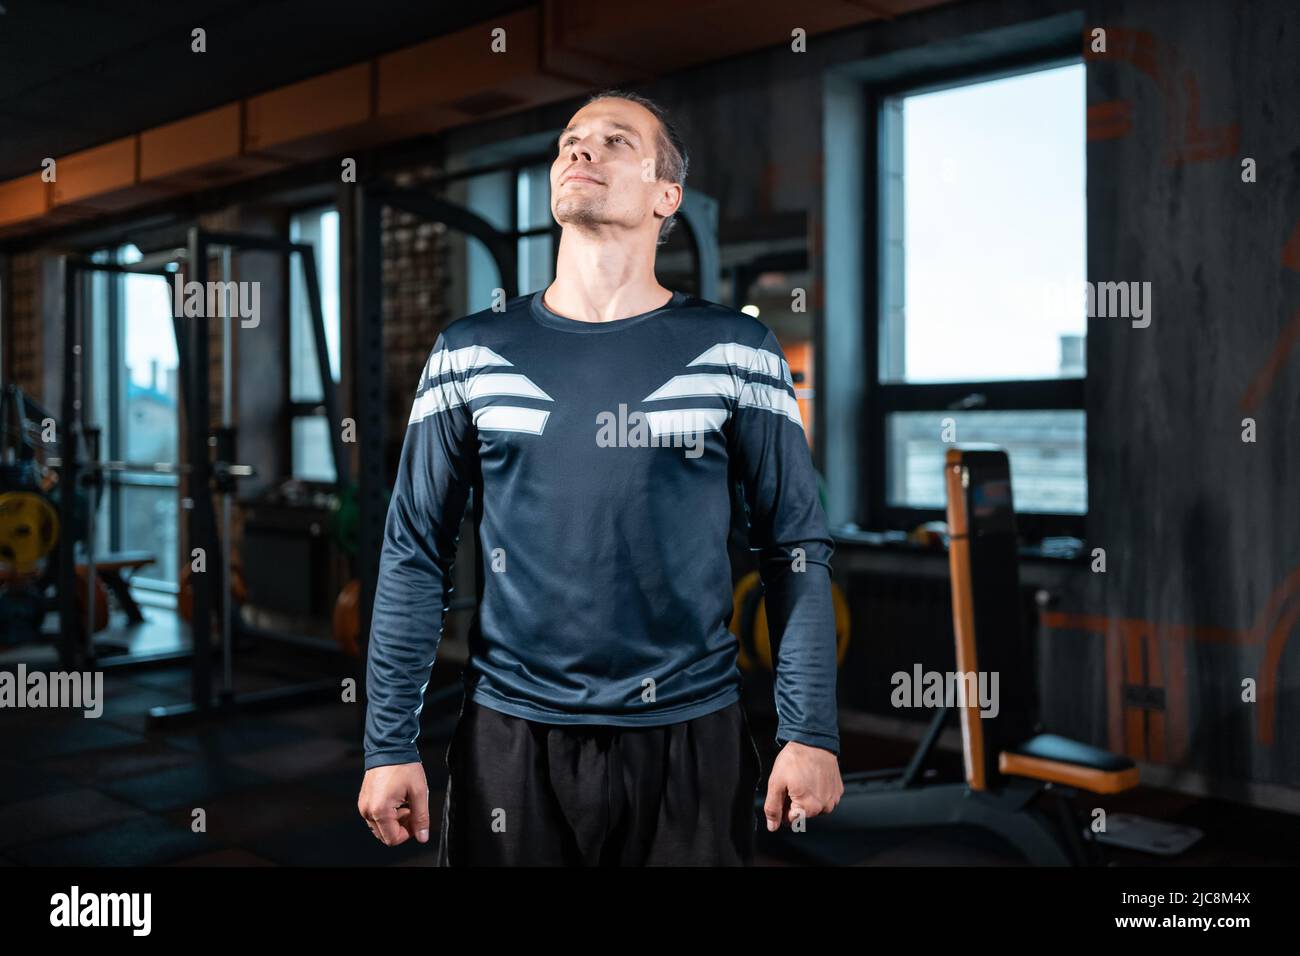 young attractive man personal trainer preparing workout in gym Stock Photo